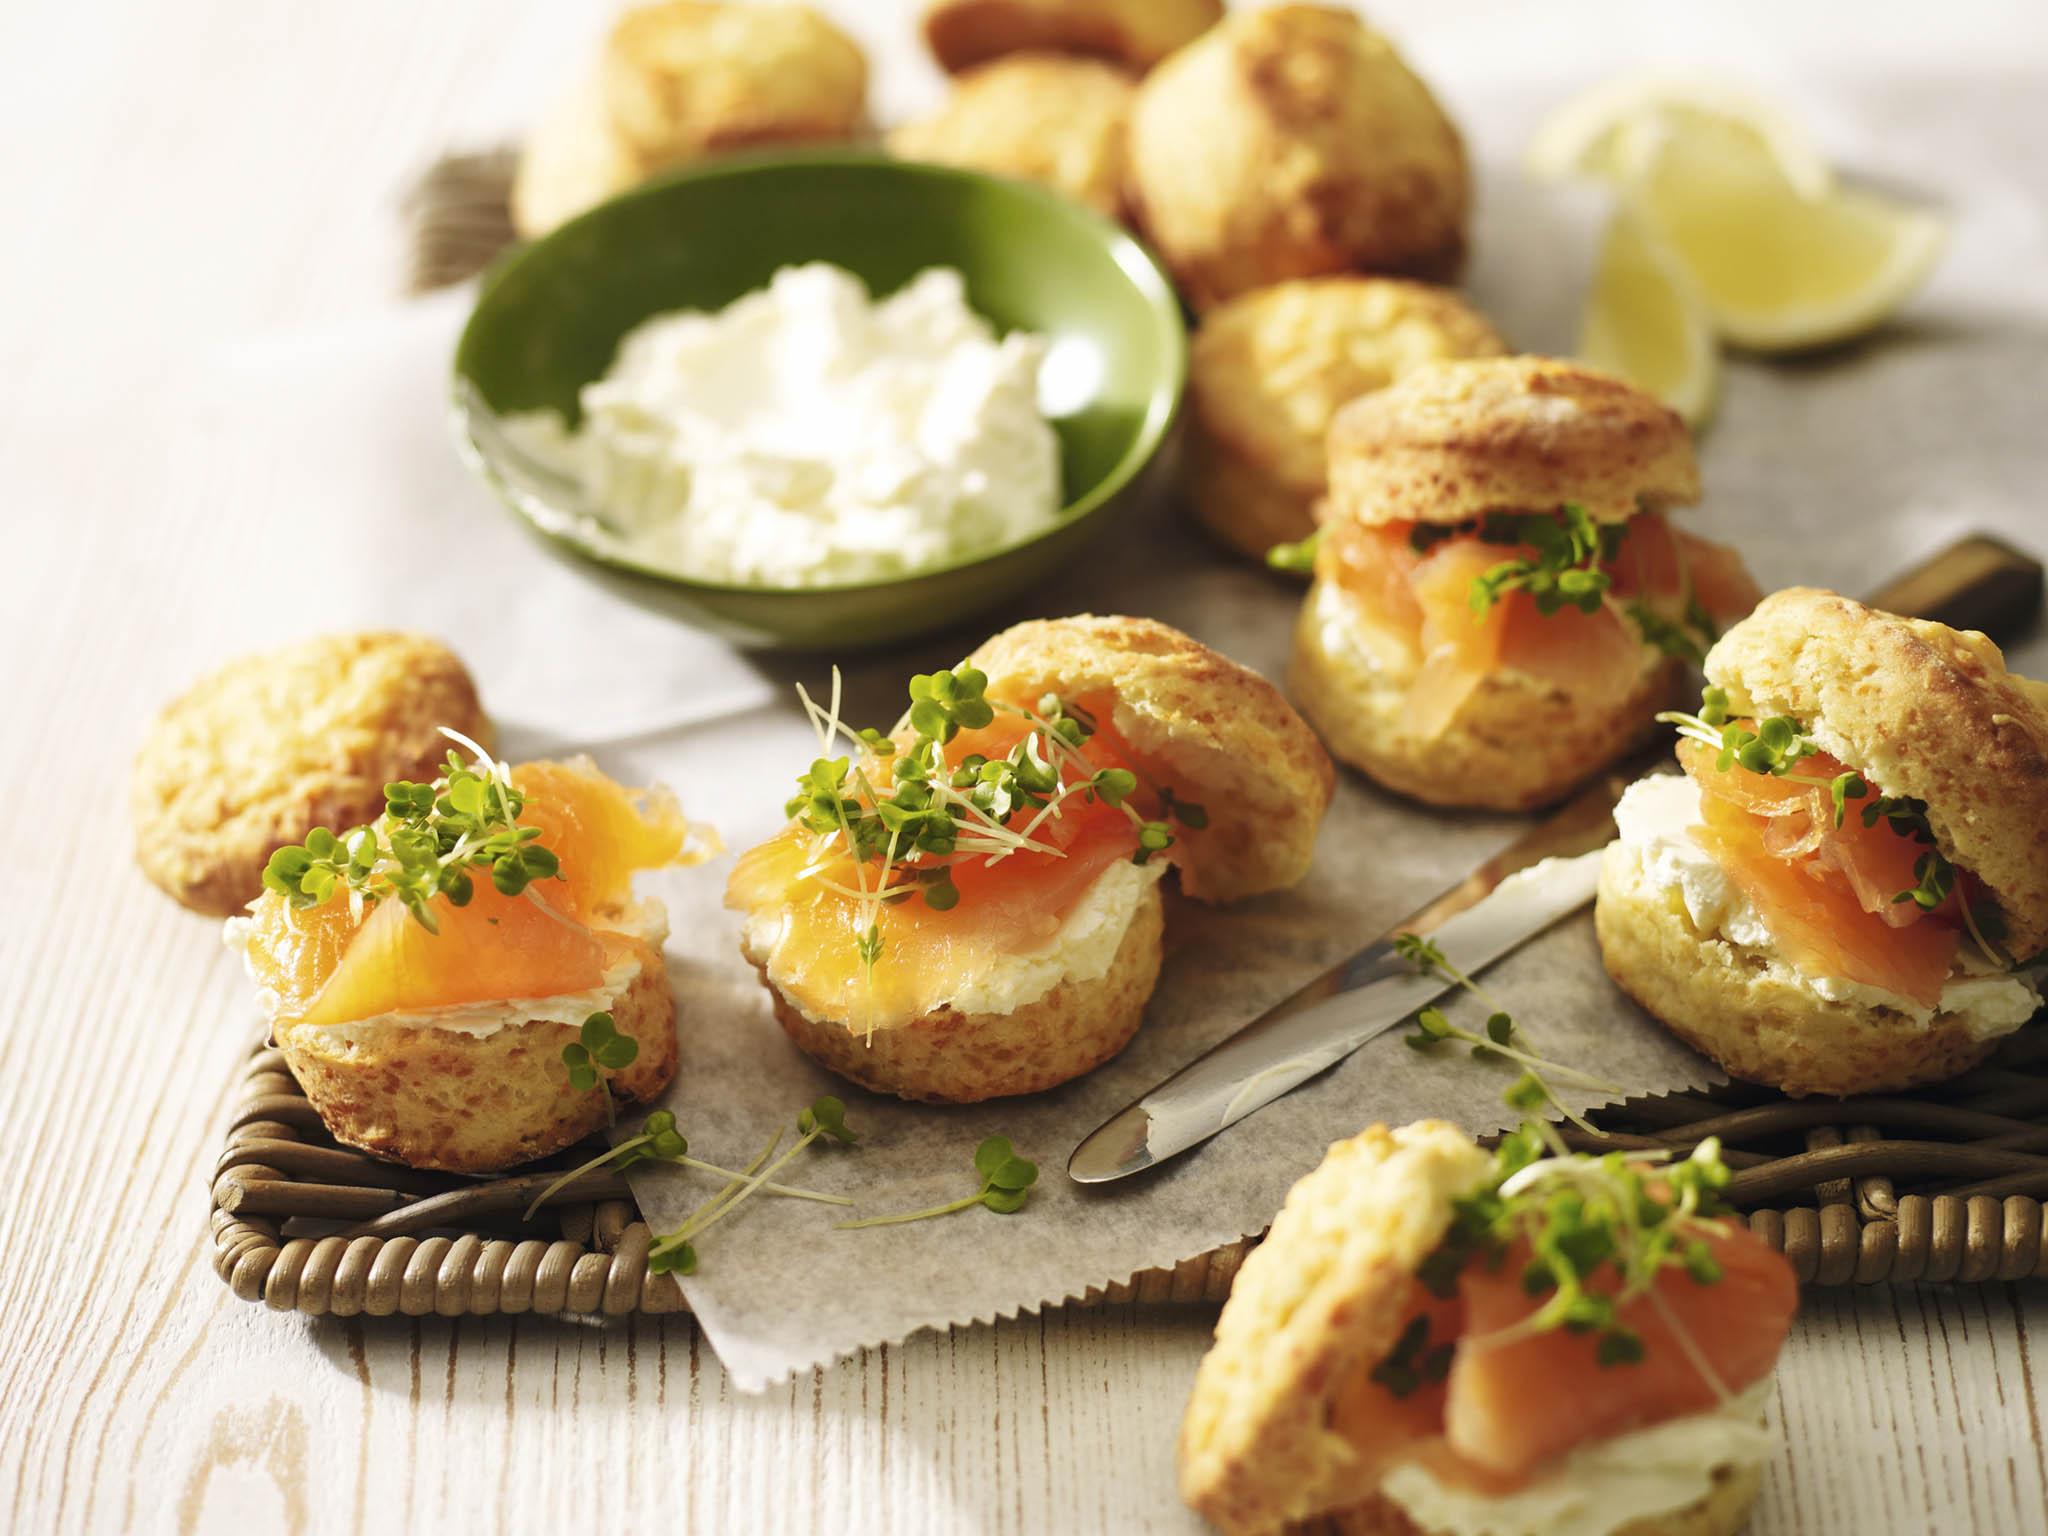 No afternoon tea is complete without smoked salmon and cream cheese